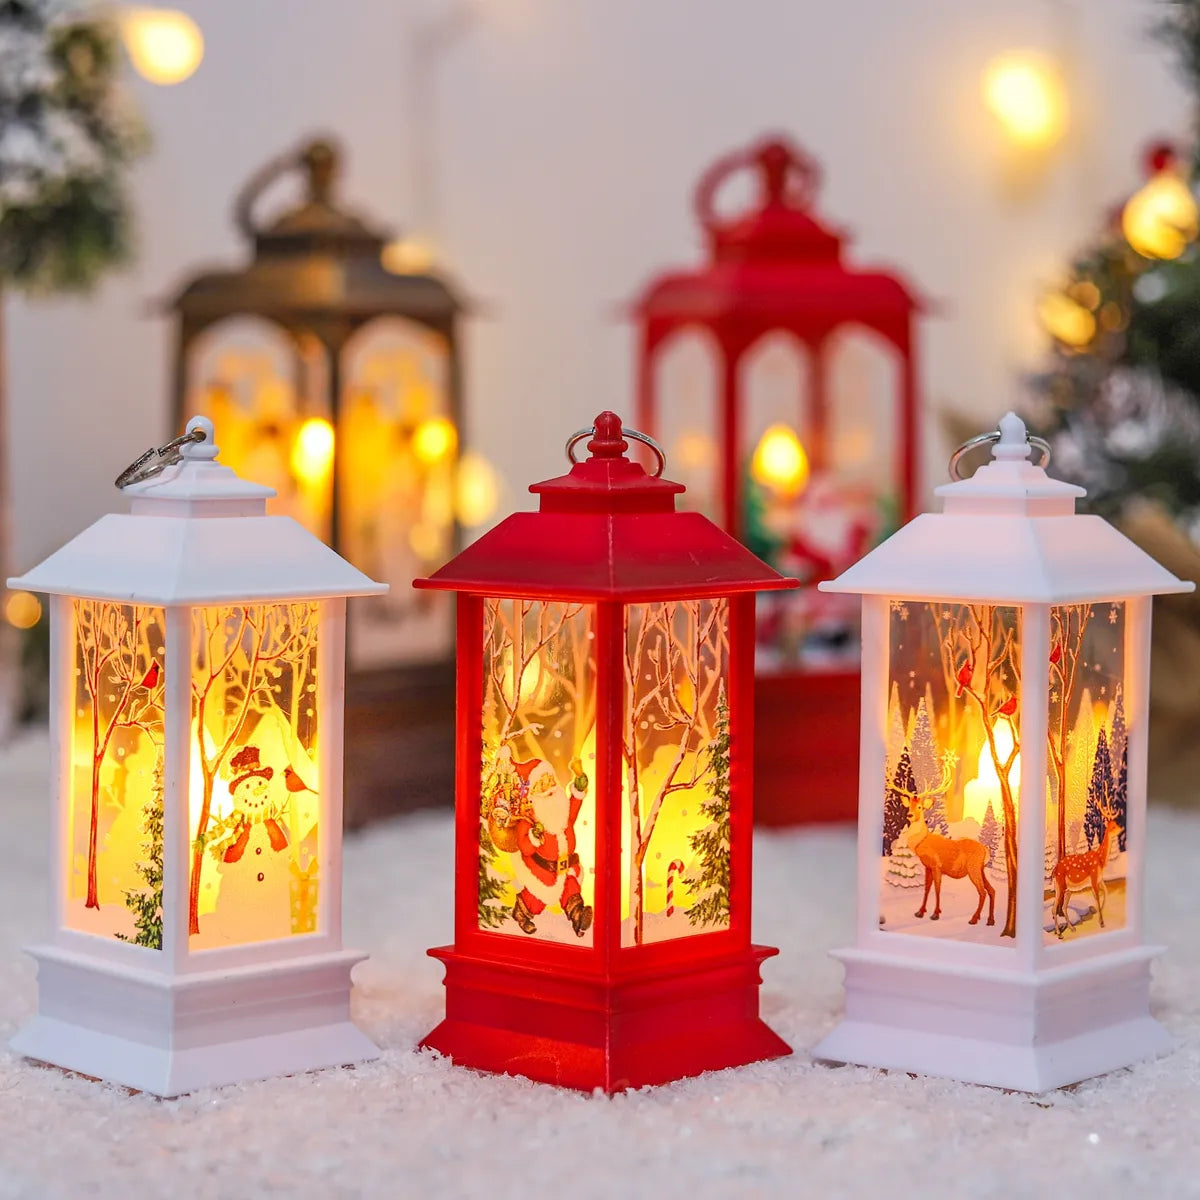 Lantern Light Decorations for Home